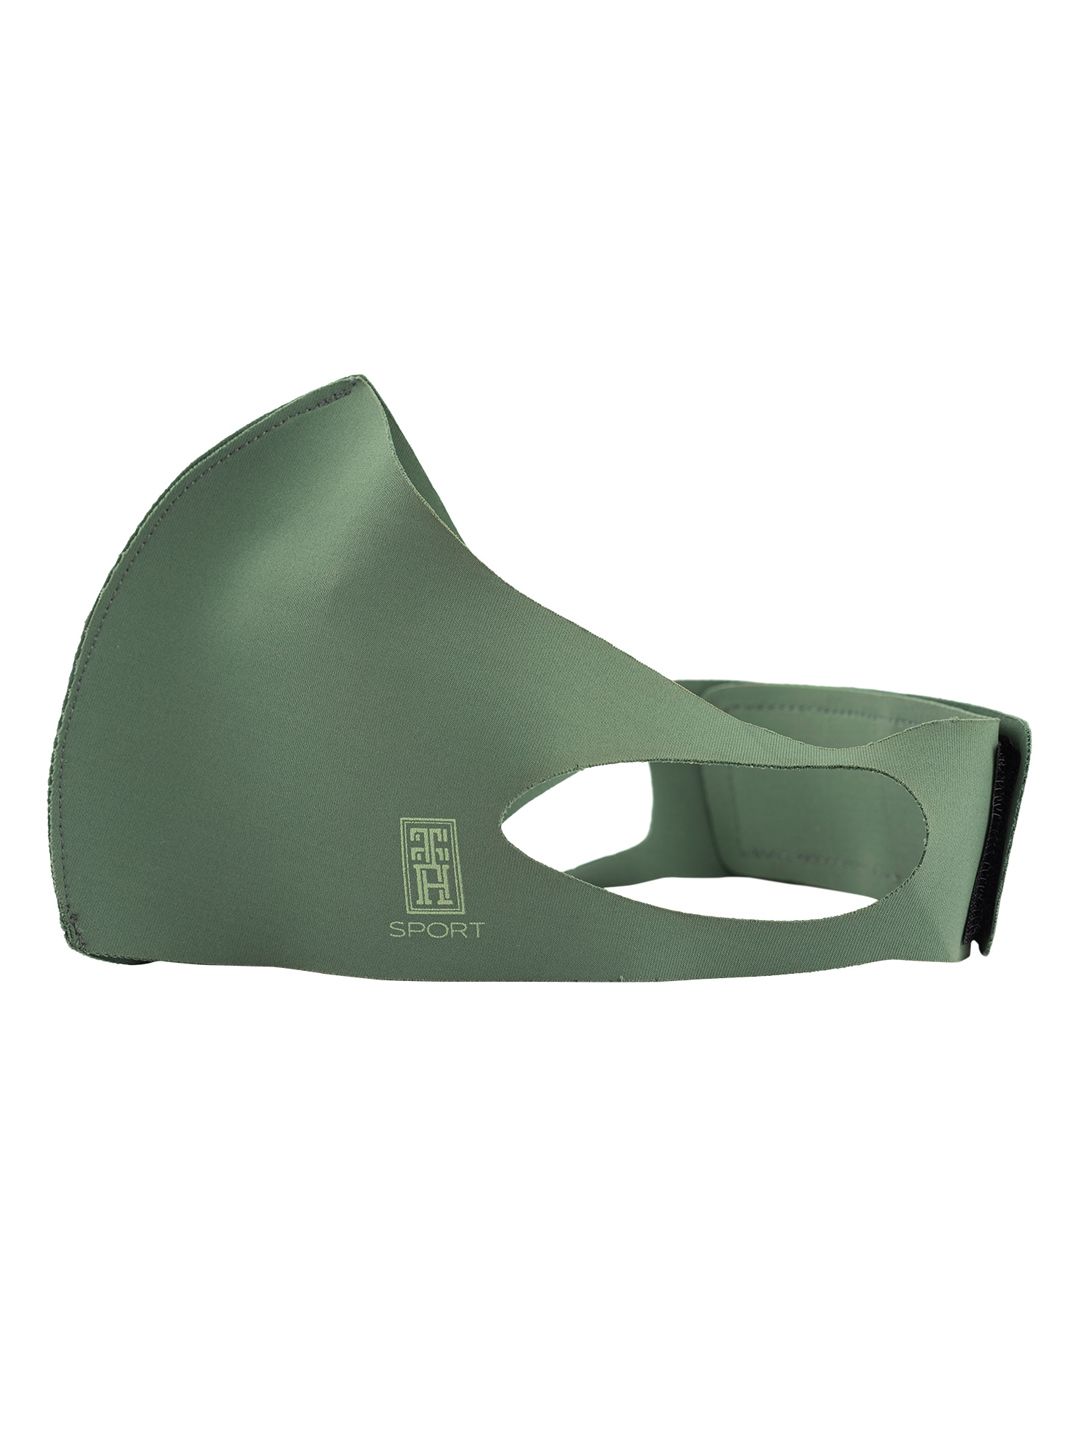 The Tie Hub Unisex Olive Sports Mask with Band Medium Price in India